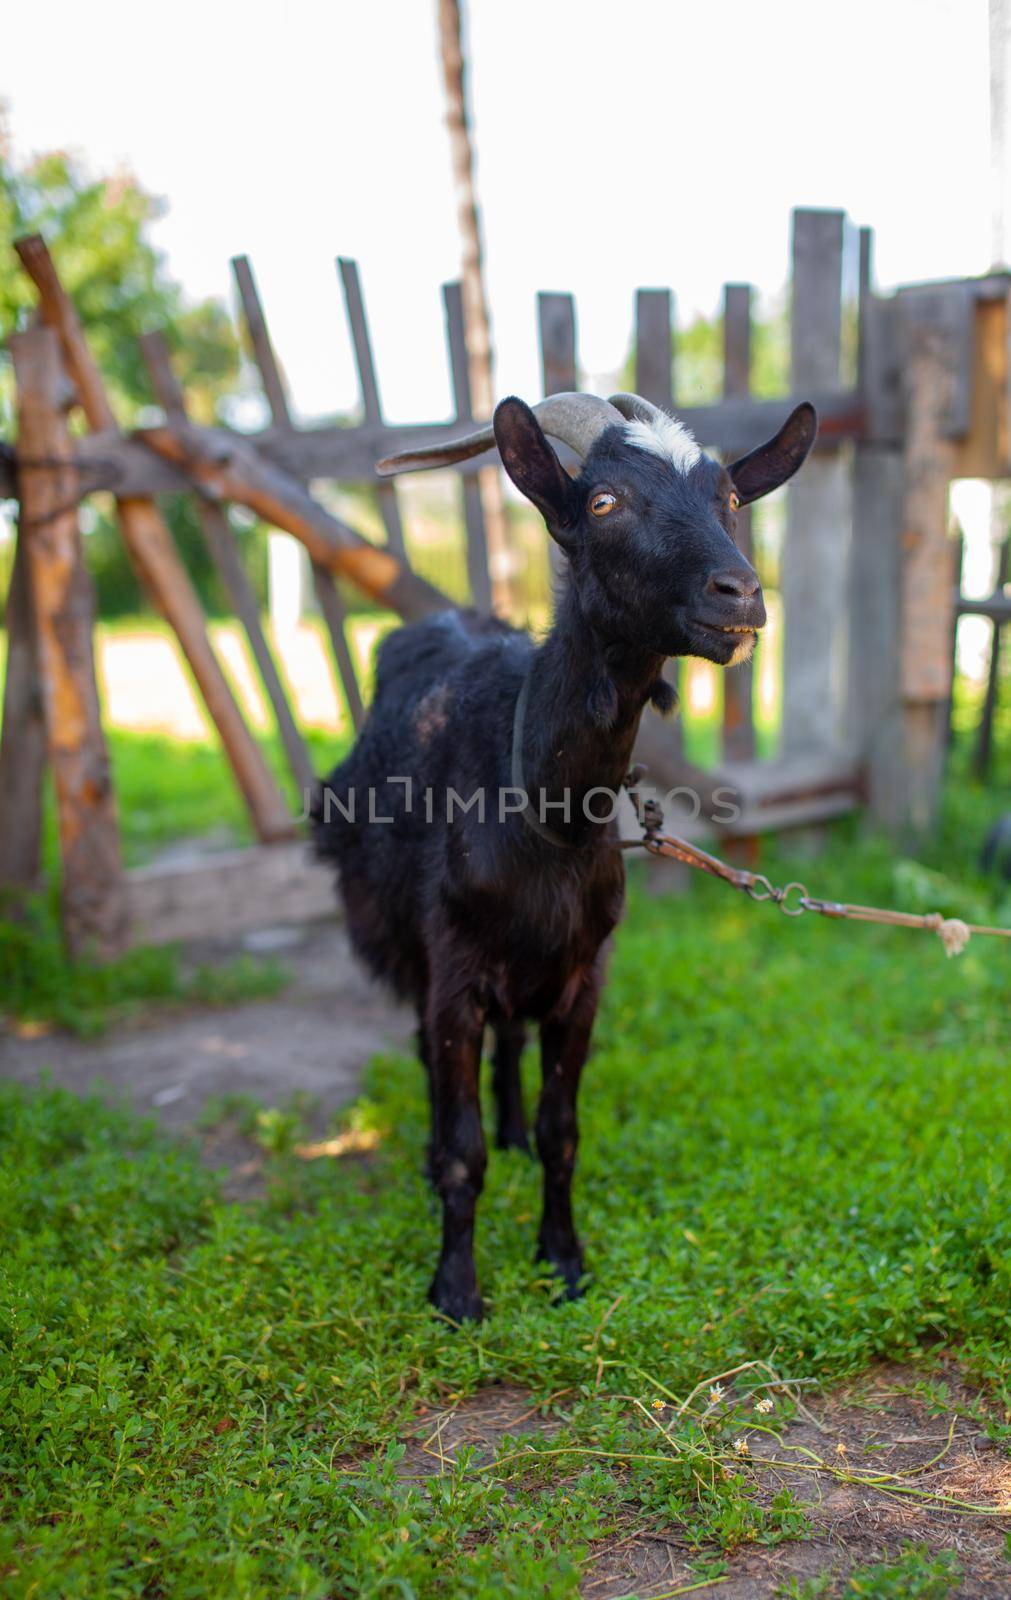 A black goat behind a wooden fence in the village poses for the camera by AnatoliiFoto